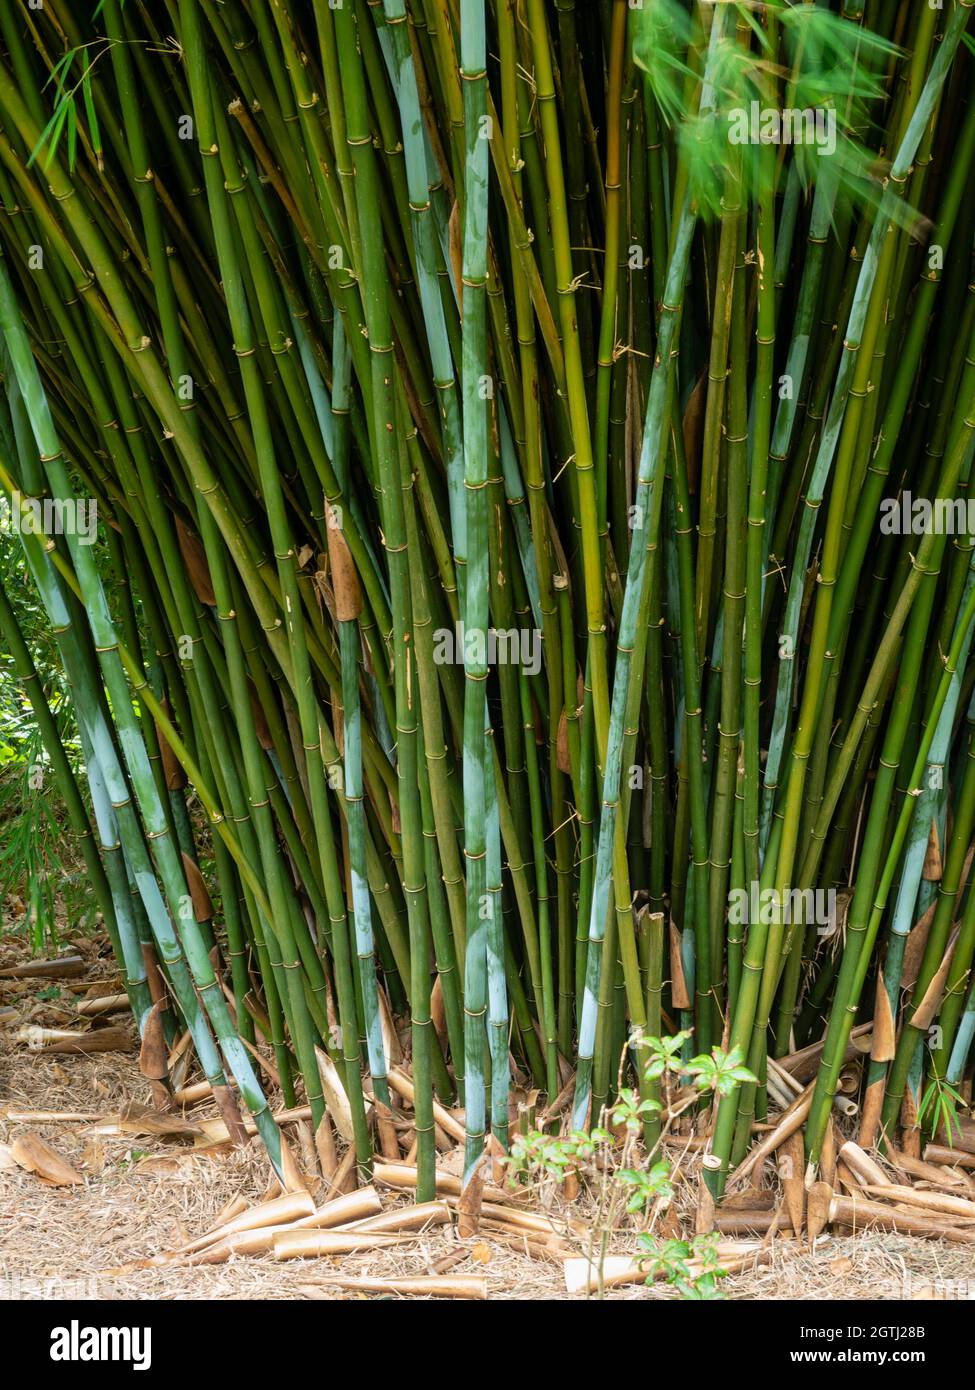 Powder blue coated new culms growing with green older stems of the hardy clumping bamboo, Borinda lushuiensis Stock Photo